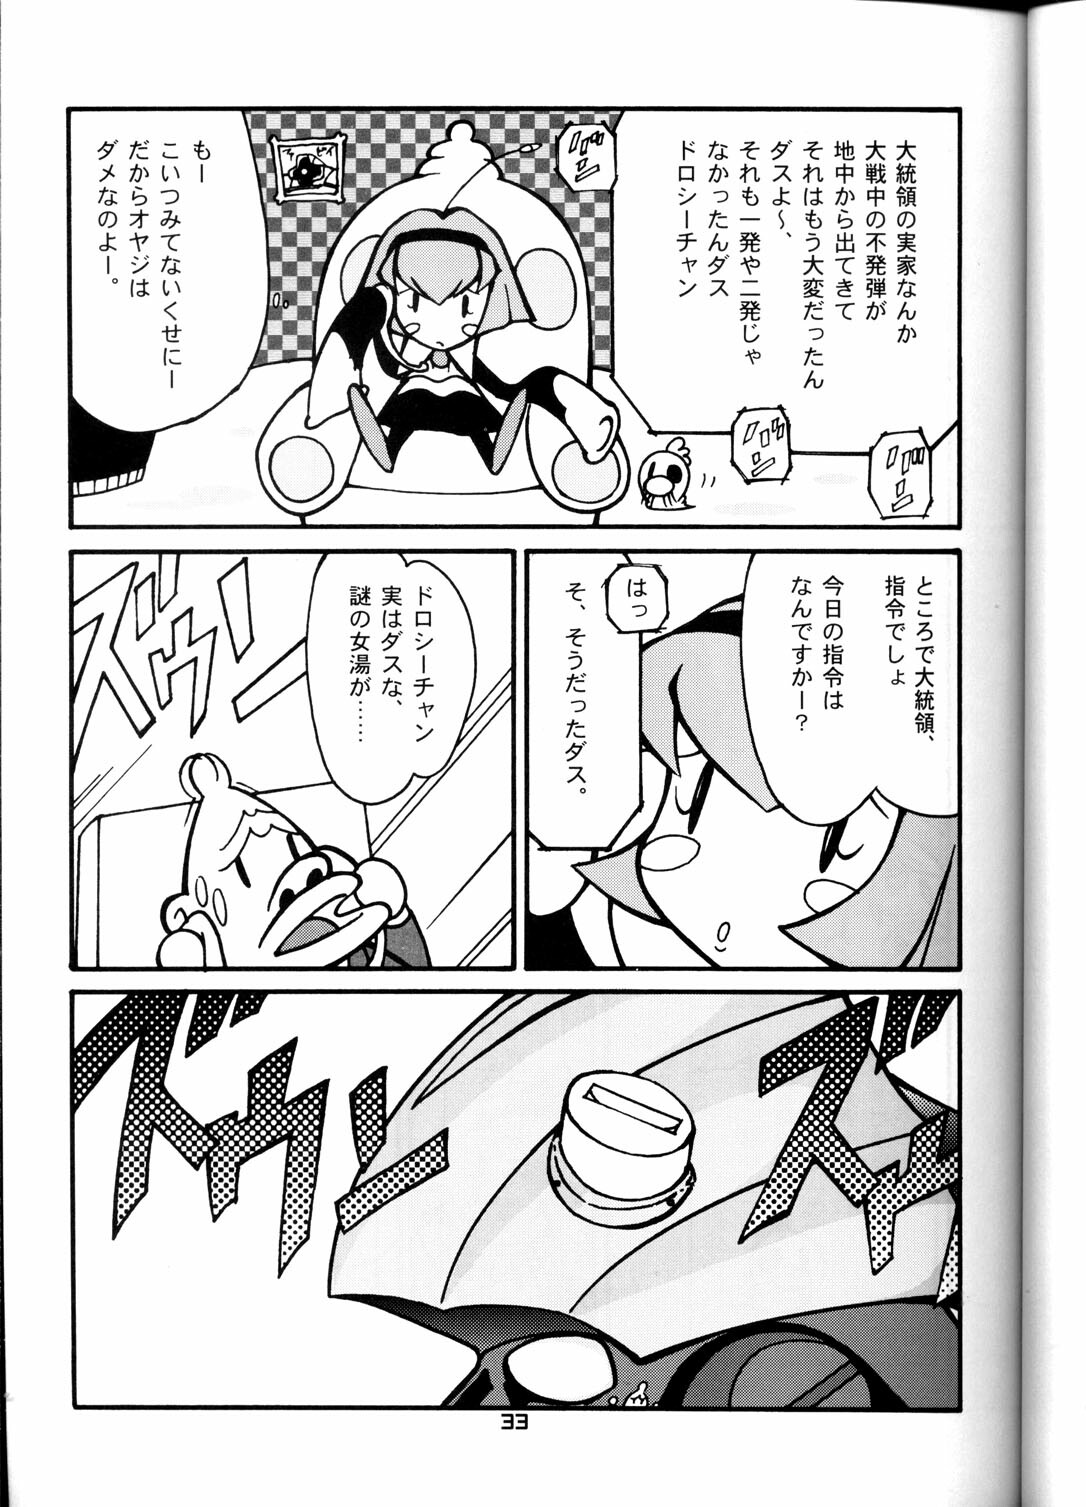 (C58) [T2 UNIT (Various)] OH! Robo Musume Chuushuugou! (Various) page 33 full